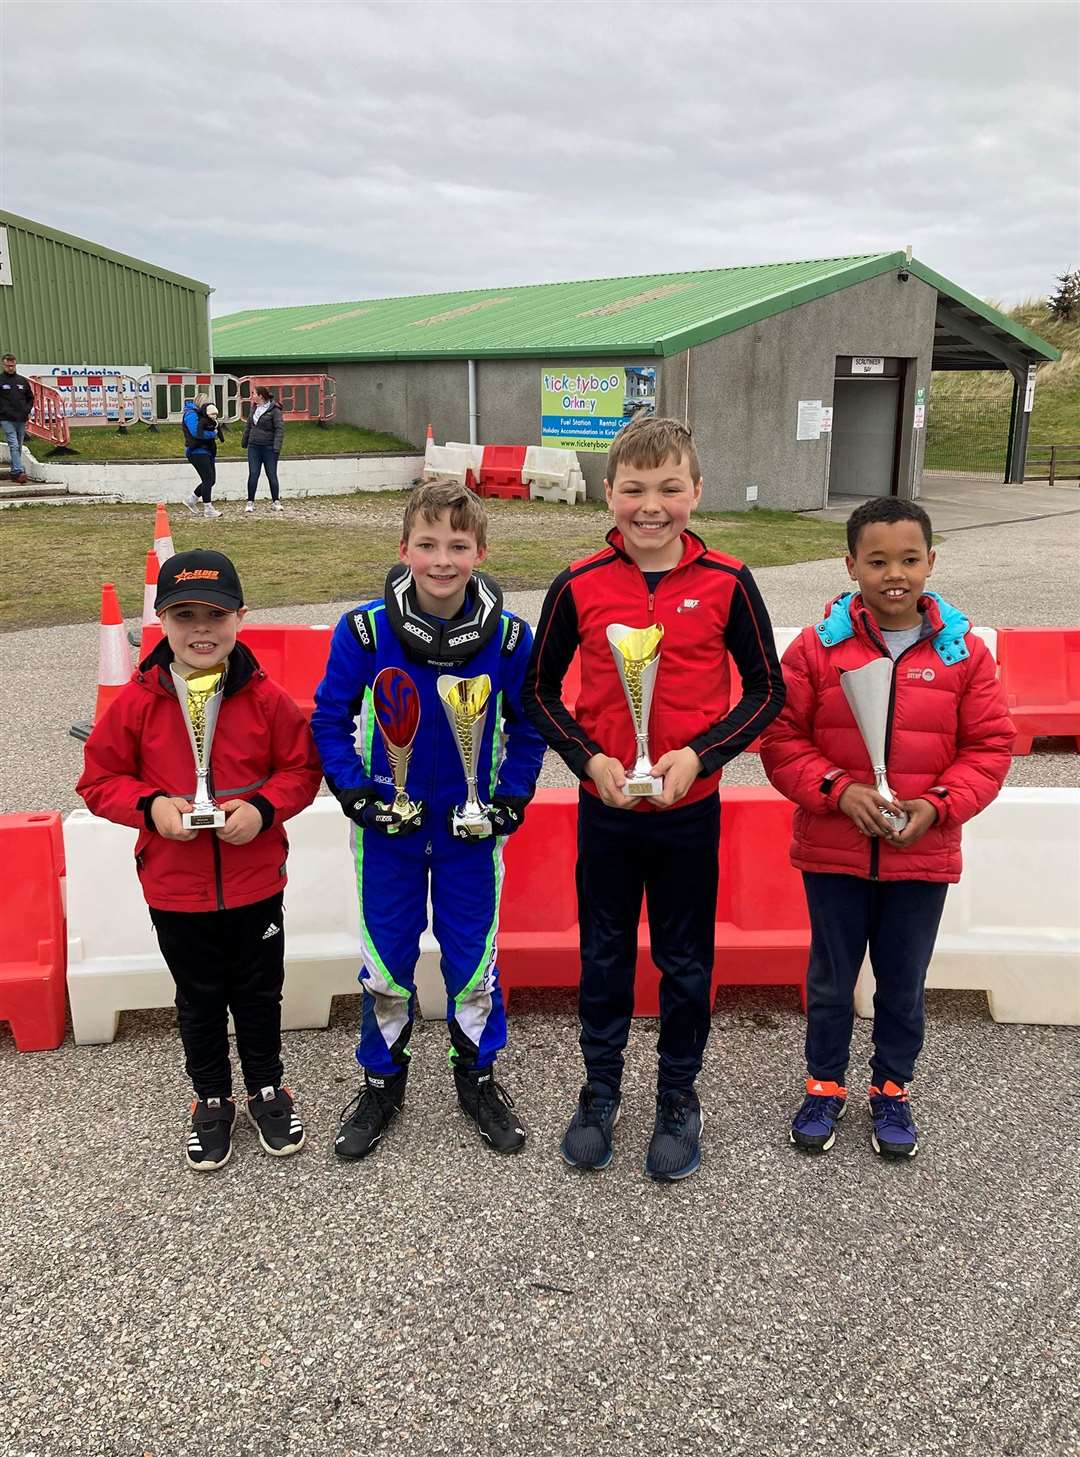 The four Caithness drivers, (from left) Jack Elder, Finlay Calder, Ian Campbell and Andrew Sutherland.